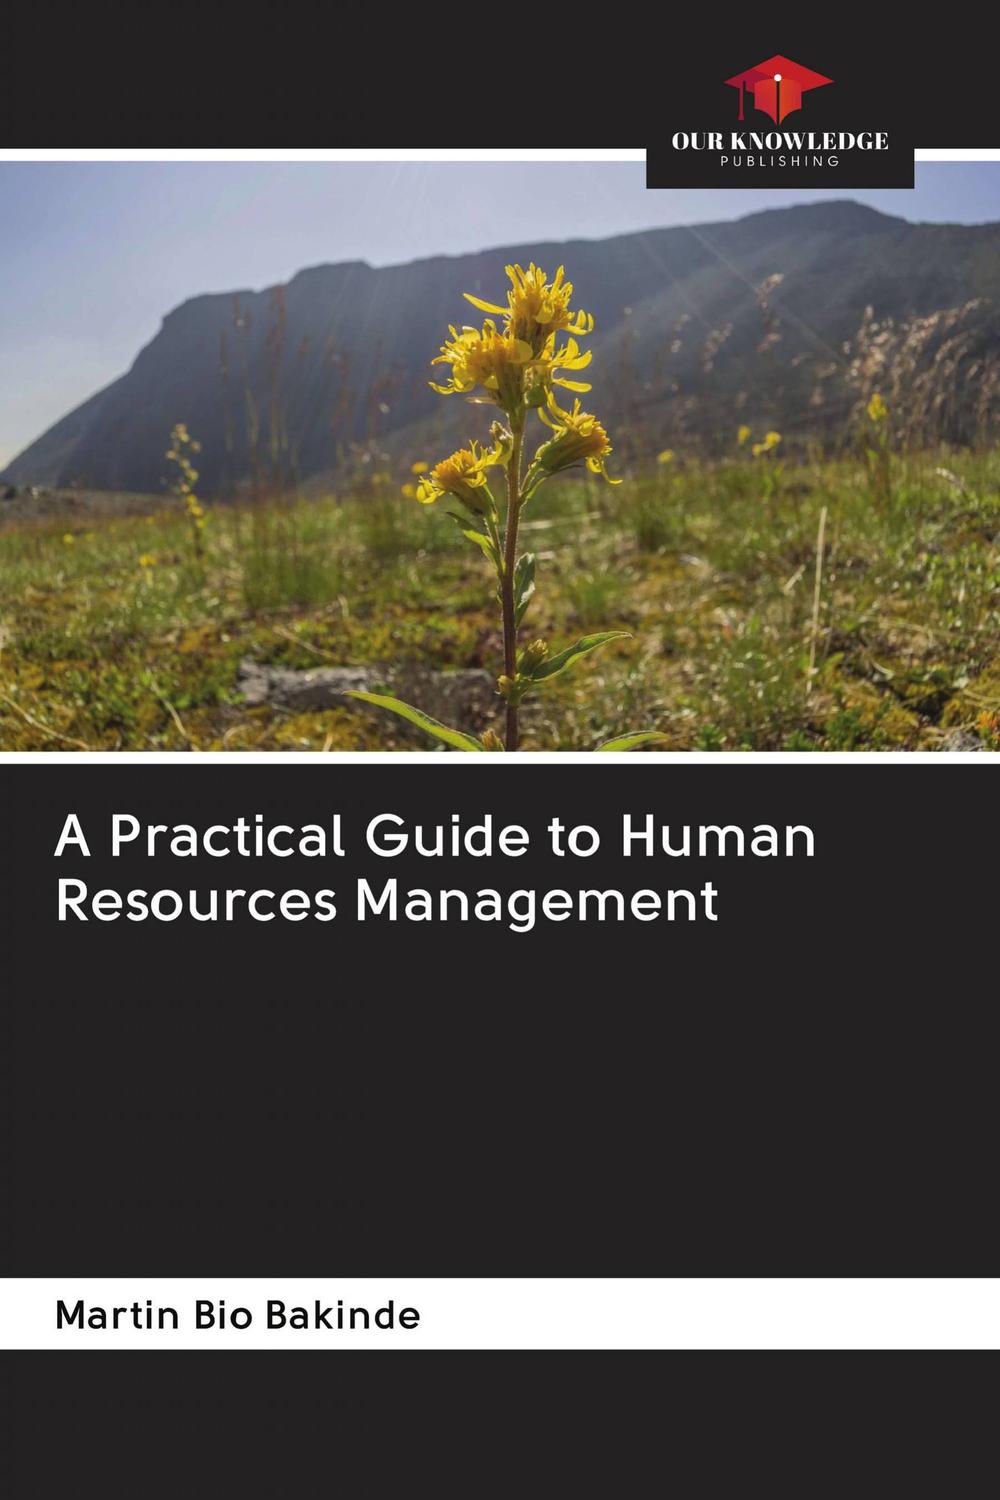 a practical guide to human resources management 1st edition bakinde, martin bio 620285491x, 9786202854917